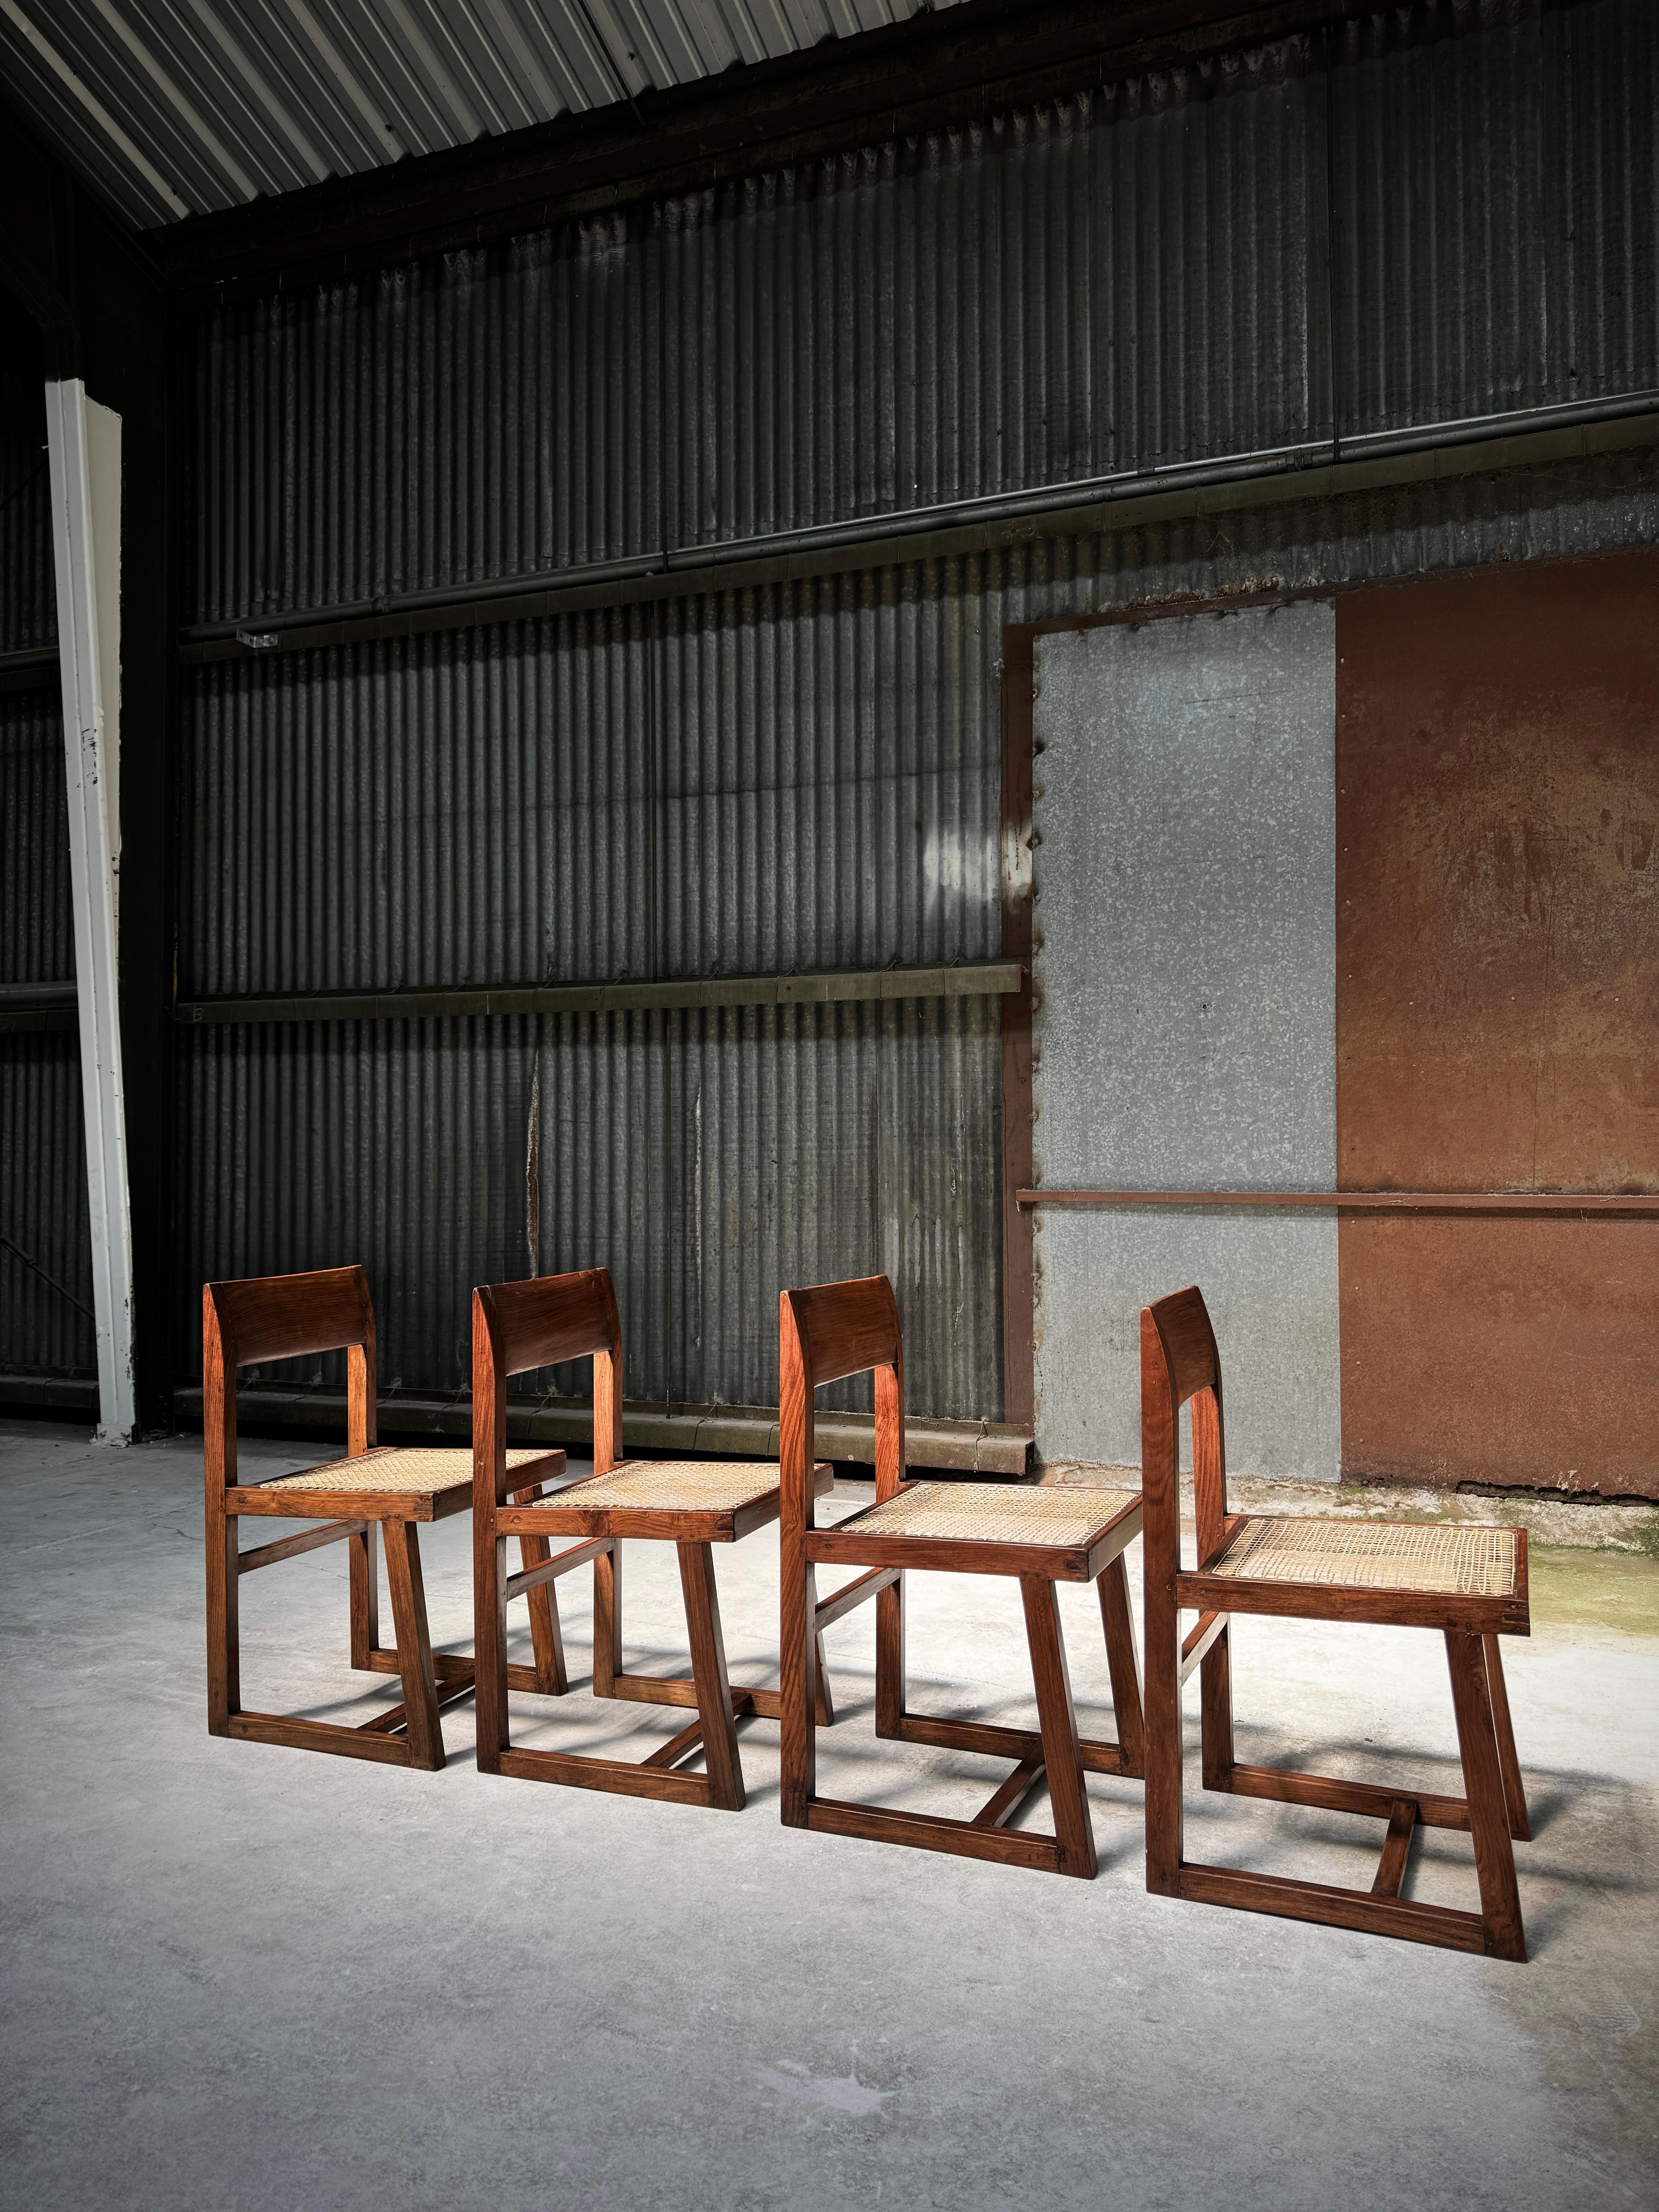 This set of 4 box chairs were used throughout the decades in various administrative buildings in Chandigarh, India. Small chips and scratches can be found throughout each piece, and are considered a part of its character, authenticity, and